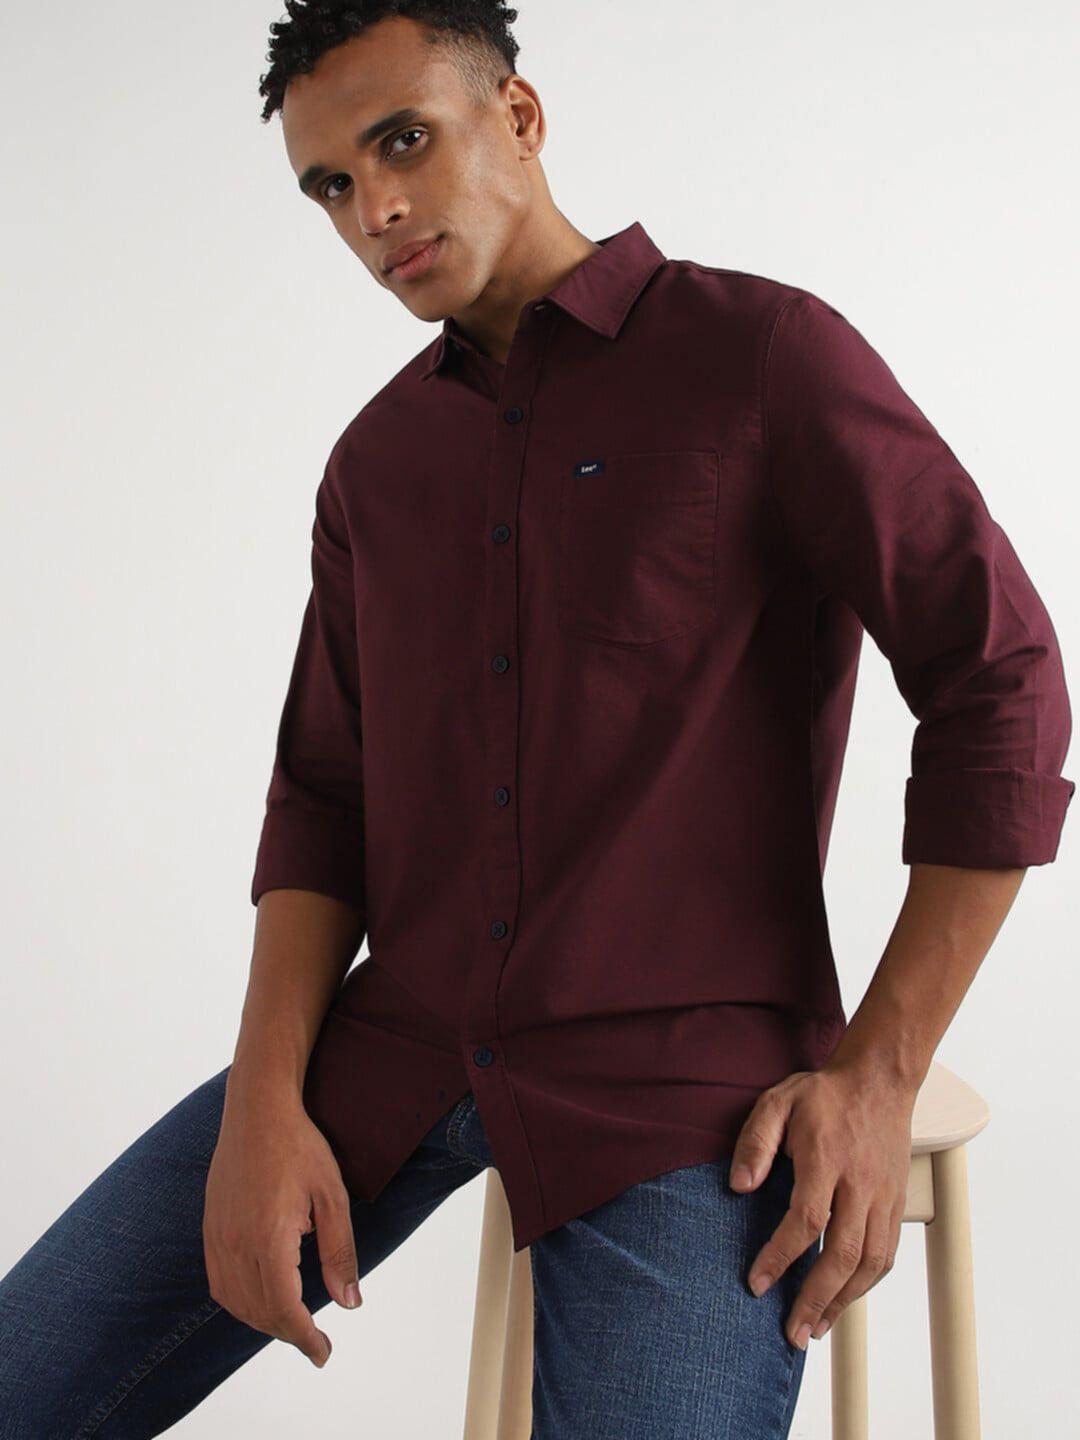 lee slim fit spread collar long sleeves opaque casual organic cotton shirt